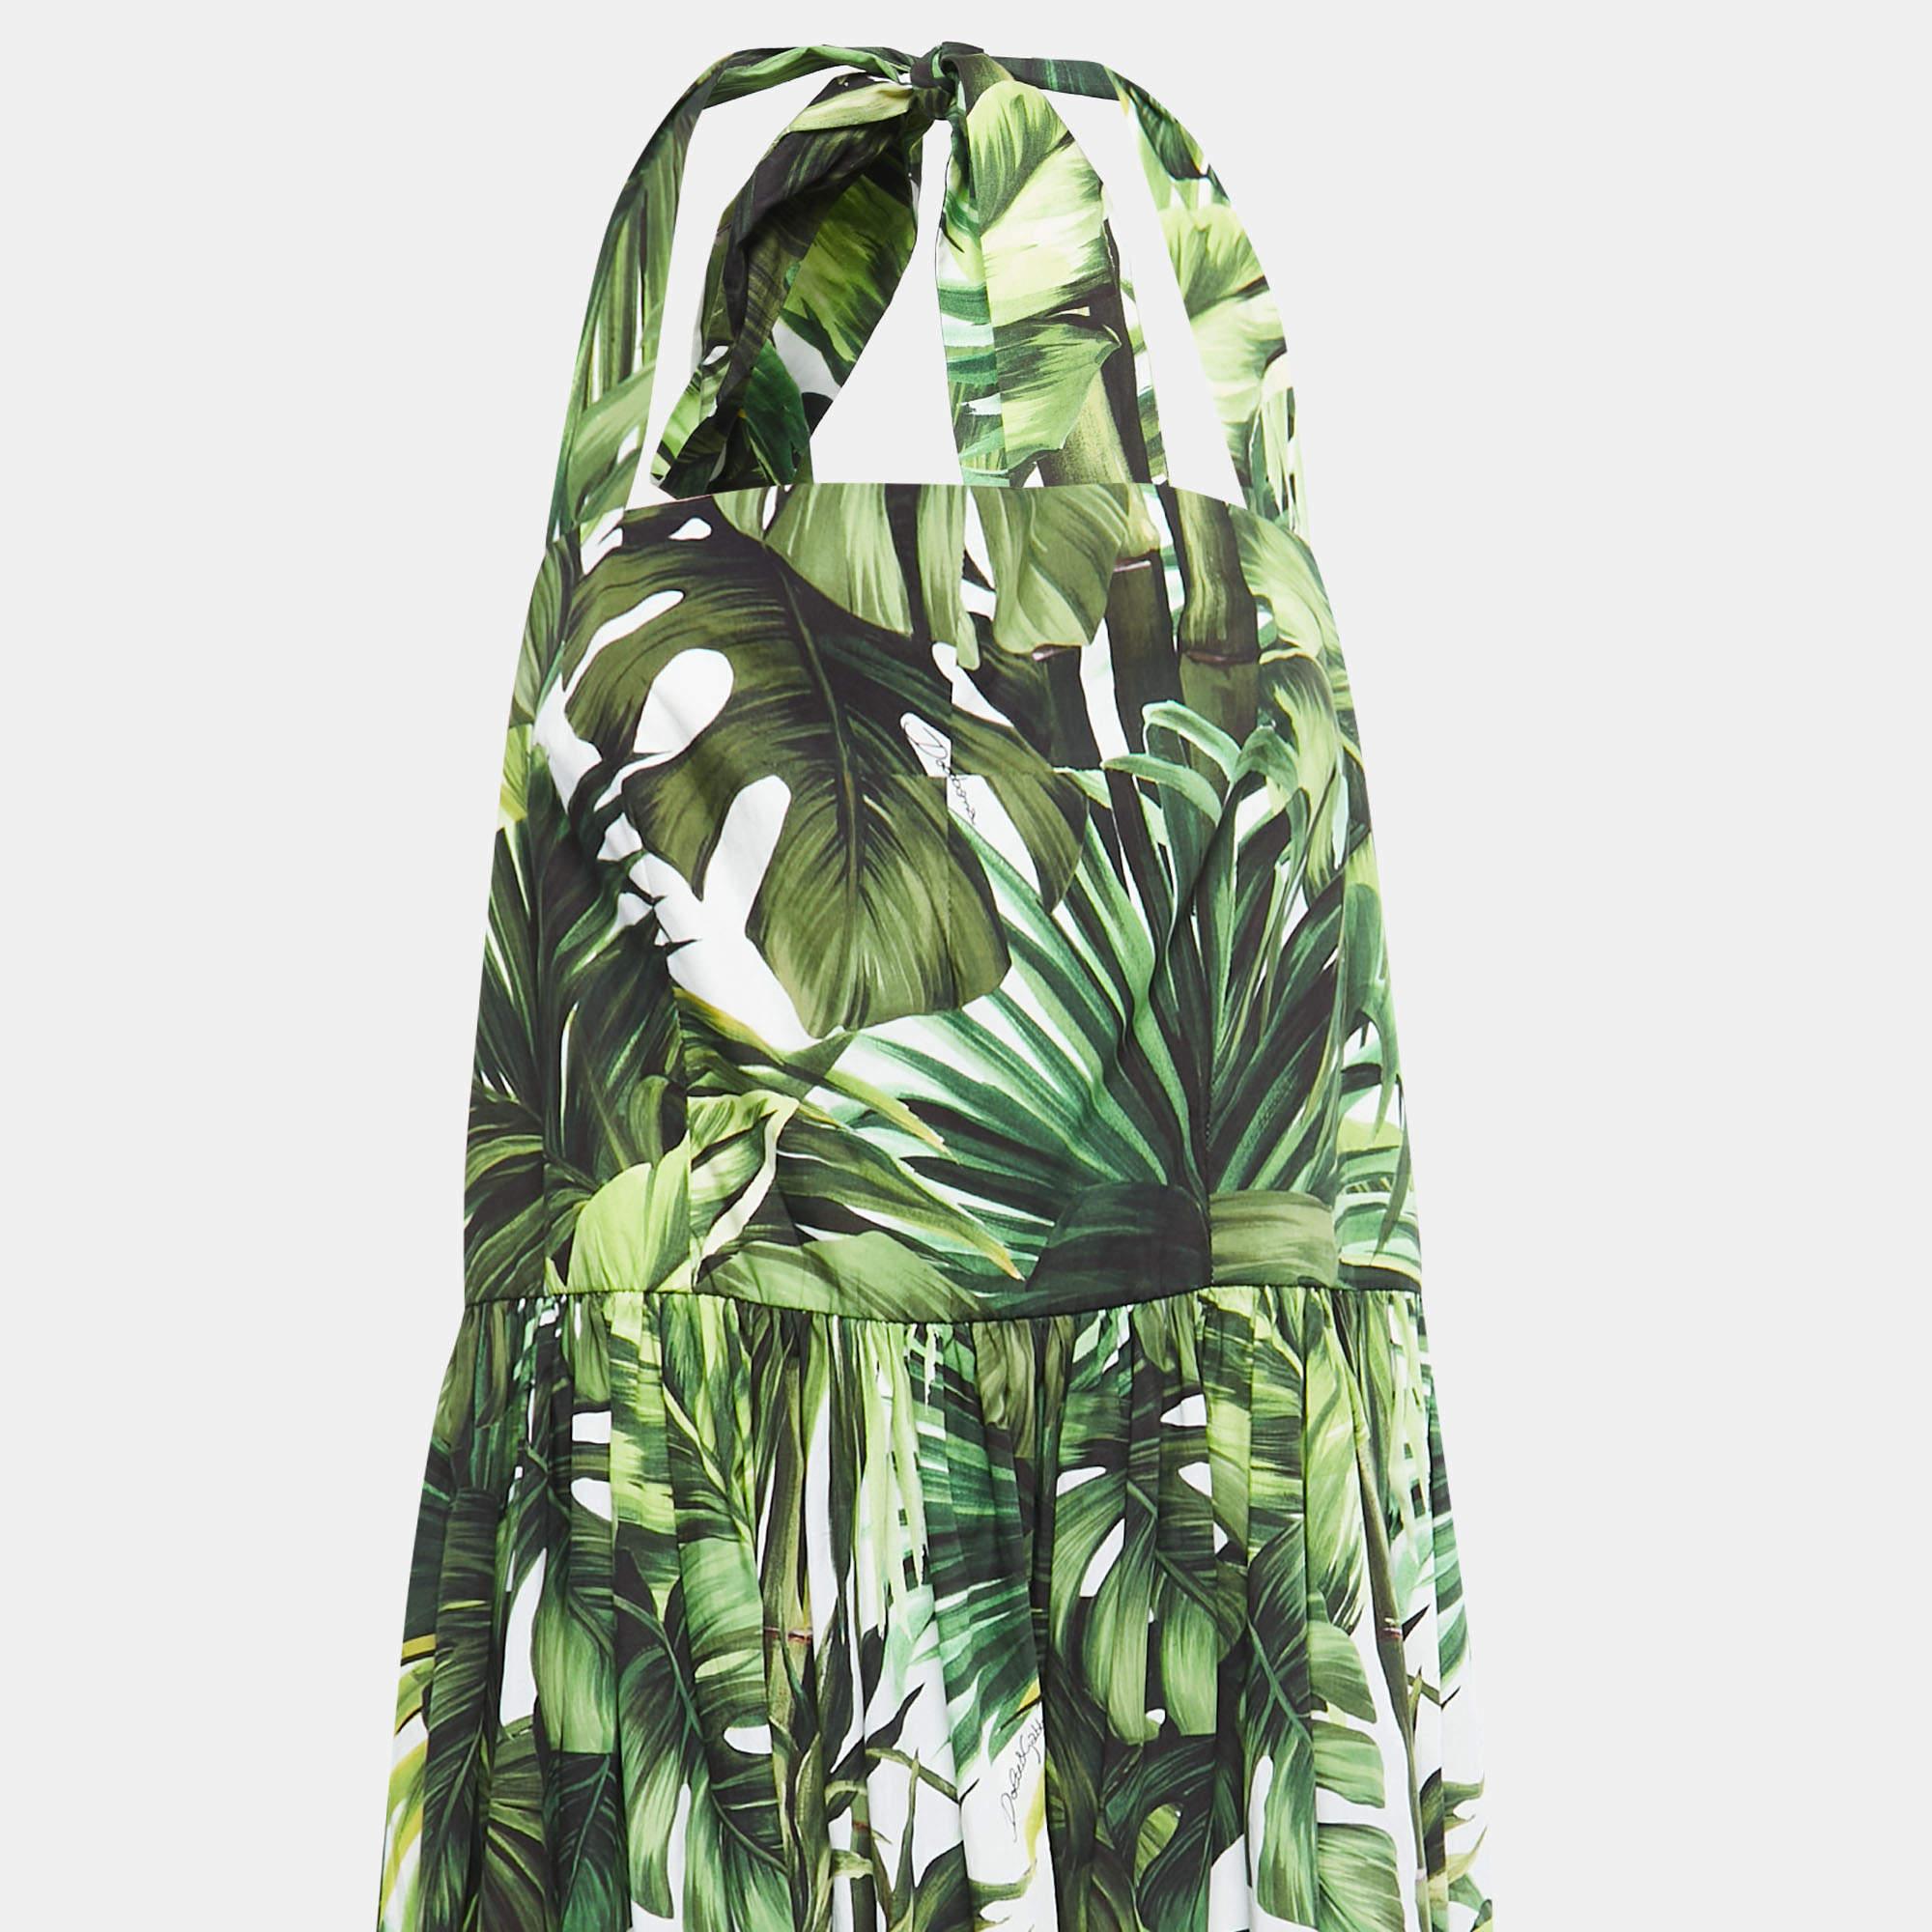 It's vibrant, joyful, and comfortable! This Dolce & Gabbana cotton dress has a simple silhouette alight with palm leaf prints. The halter neck tie adds to the appeal.

Includes: Brand Tag